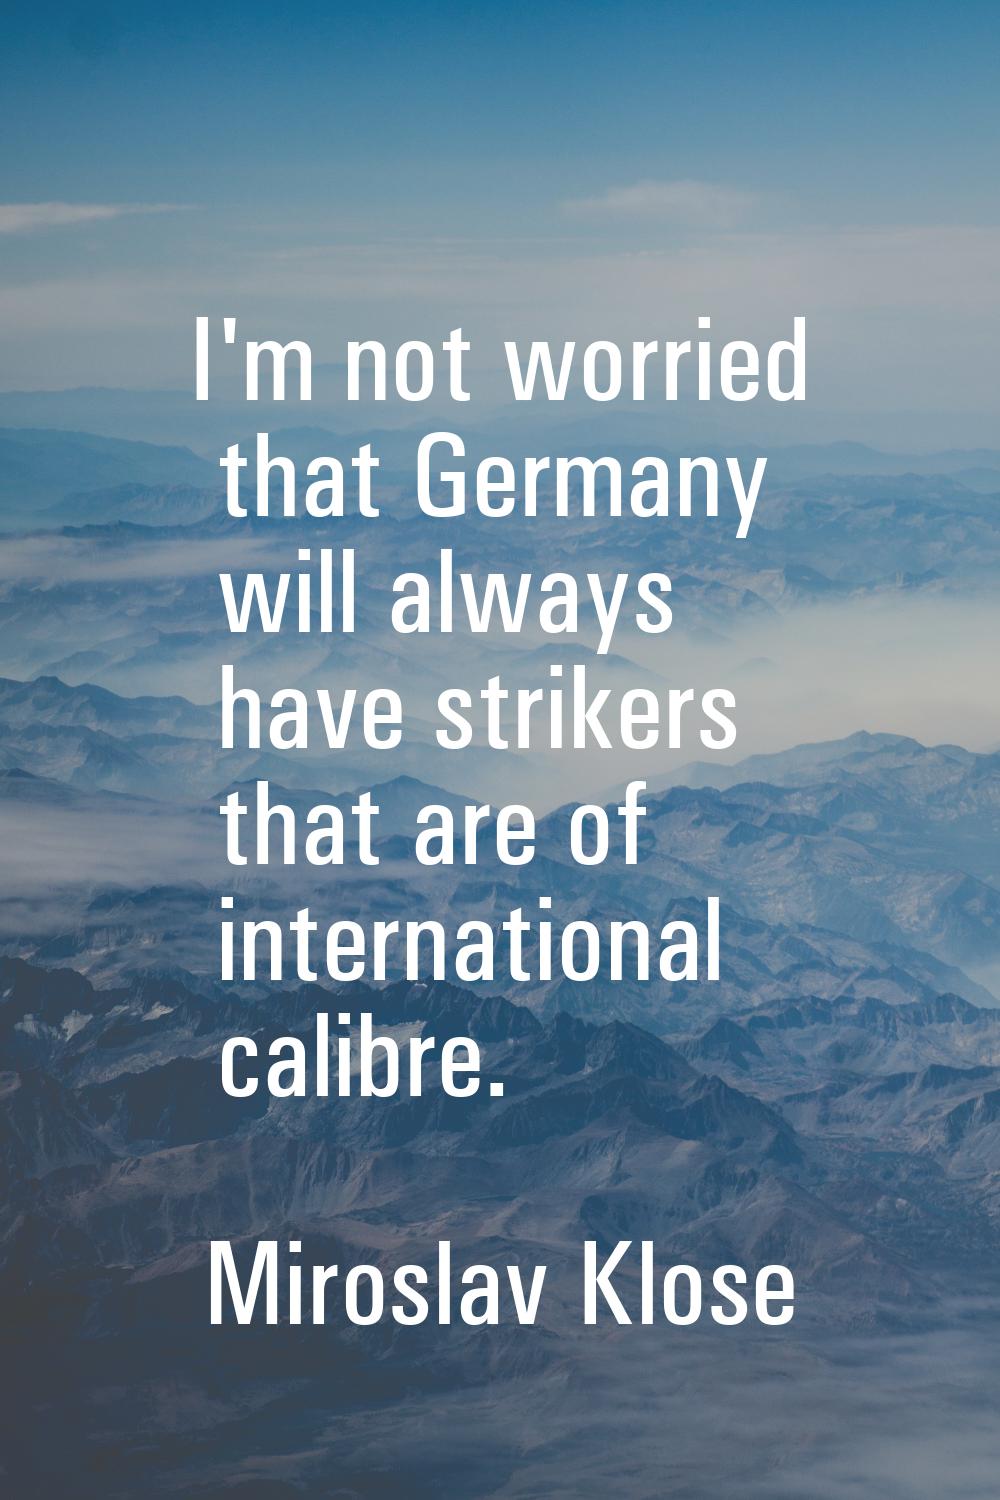 I'm not worried that Germany will always have strikers that are of international calibre.